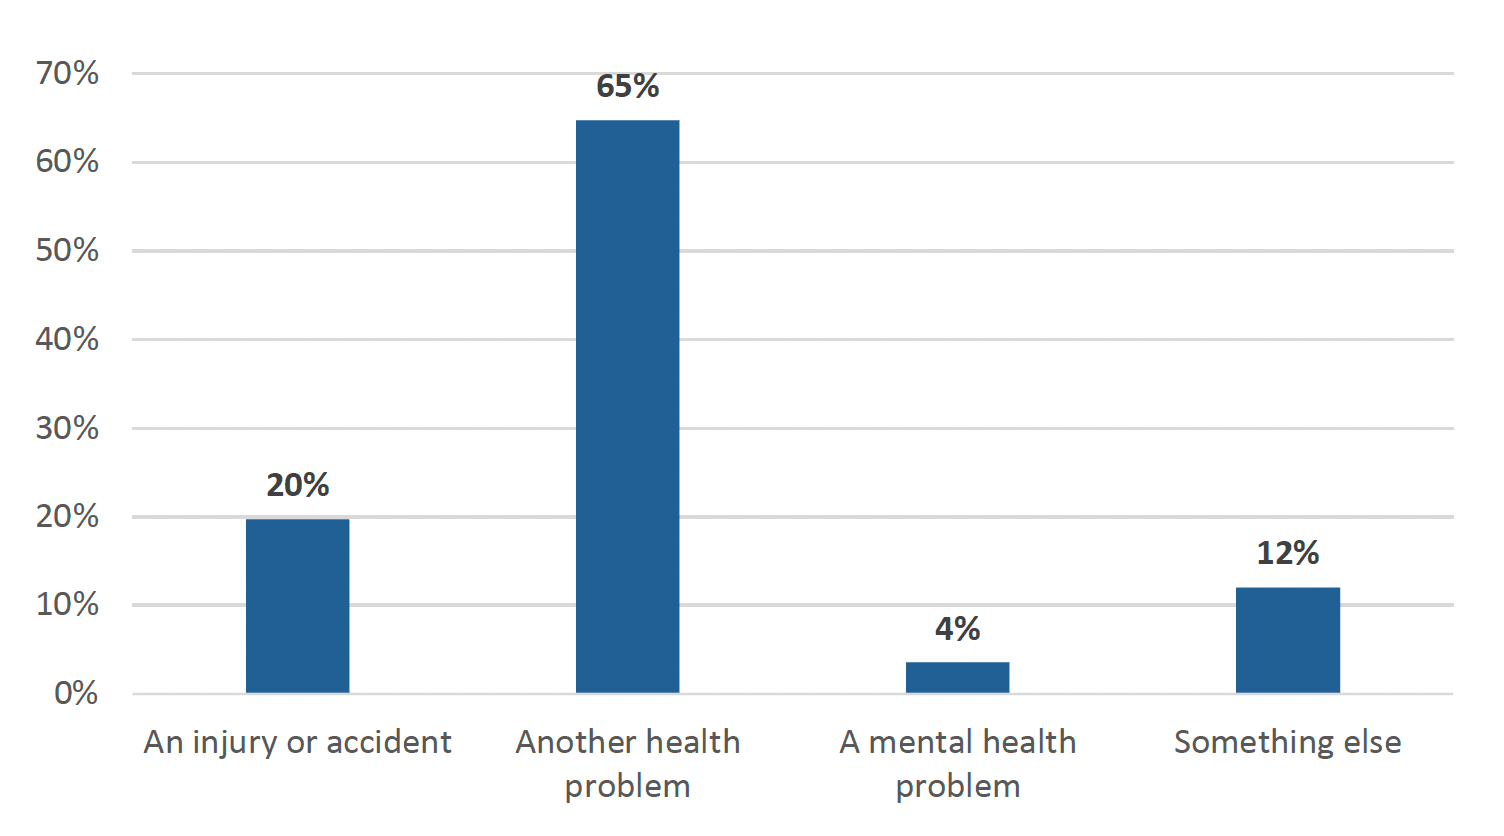 The graph shows that of all Out of Hours consultations, 20% of consultations were for an injury or accident, and 65% for another health problem.